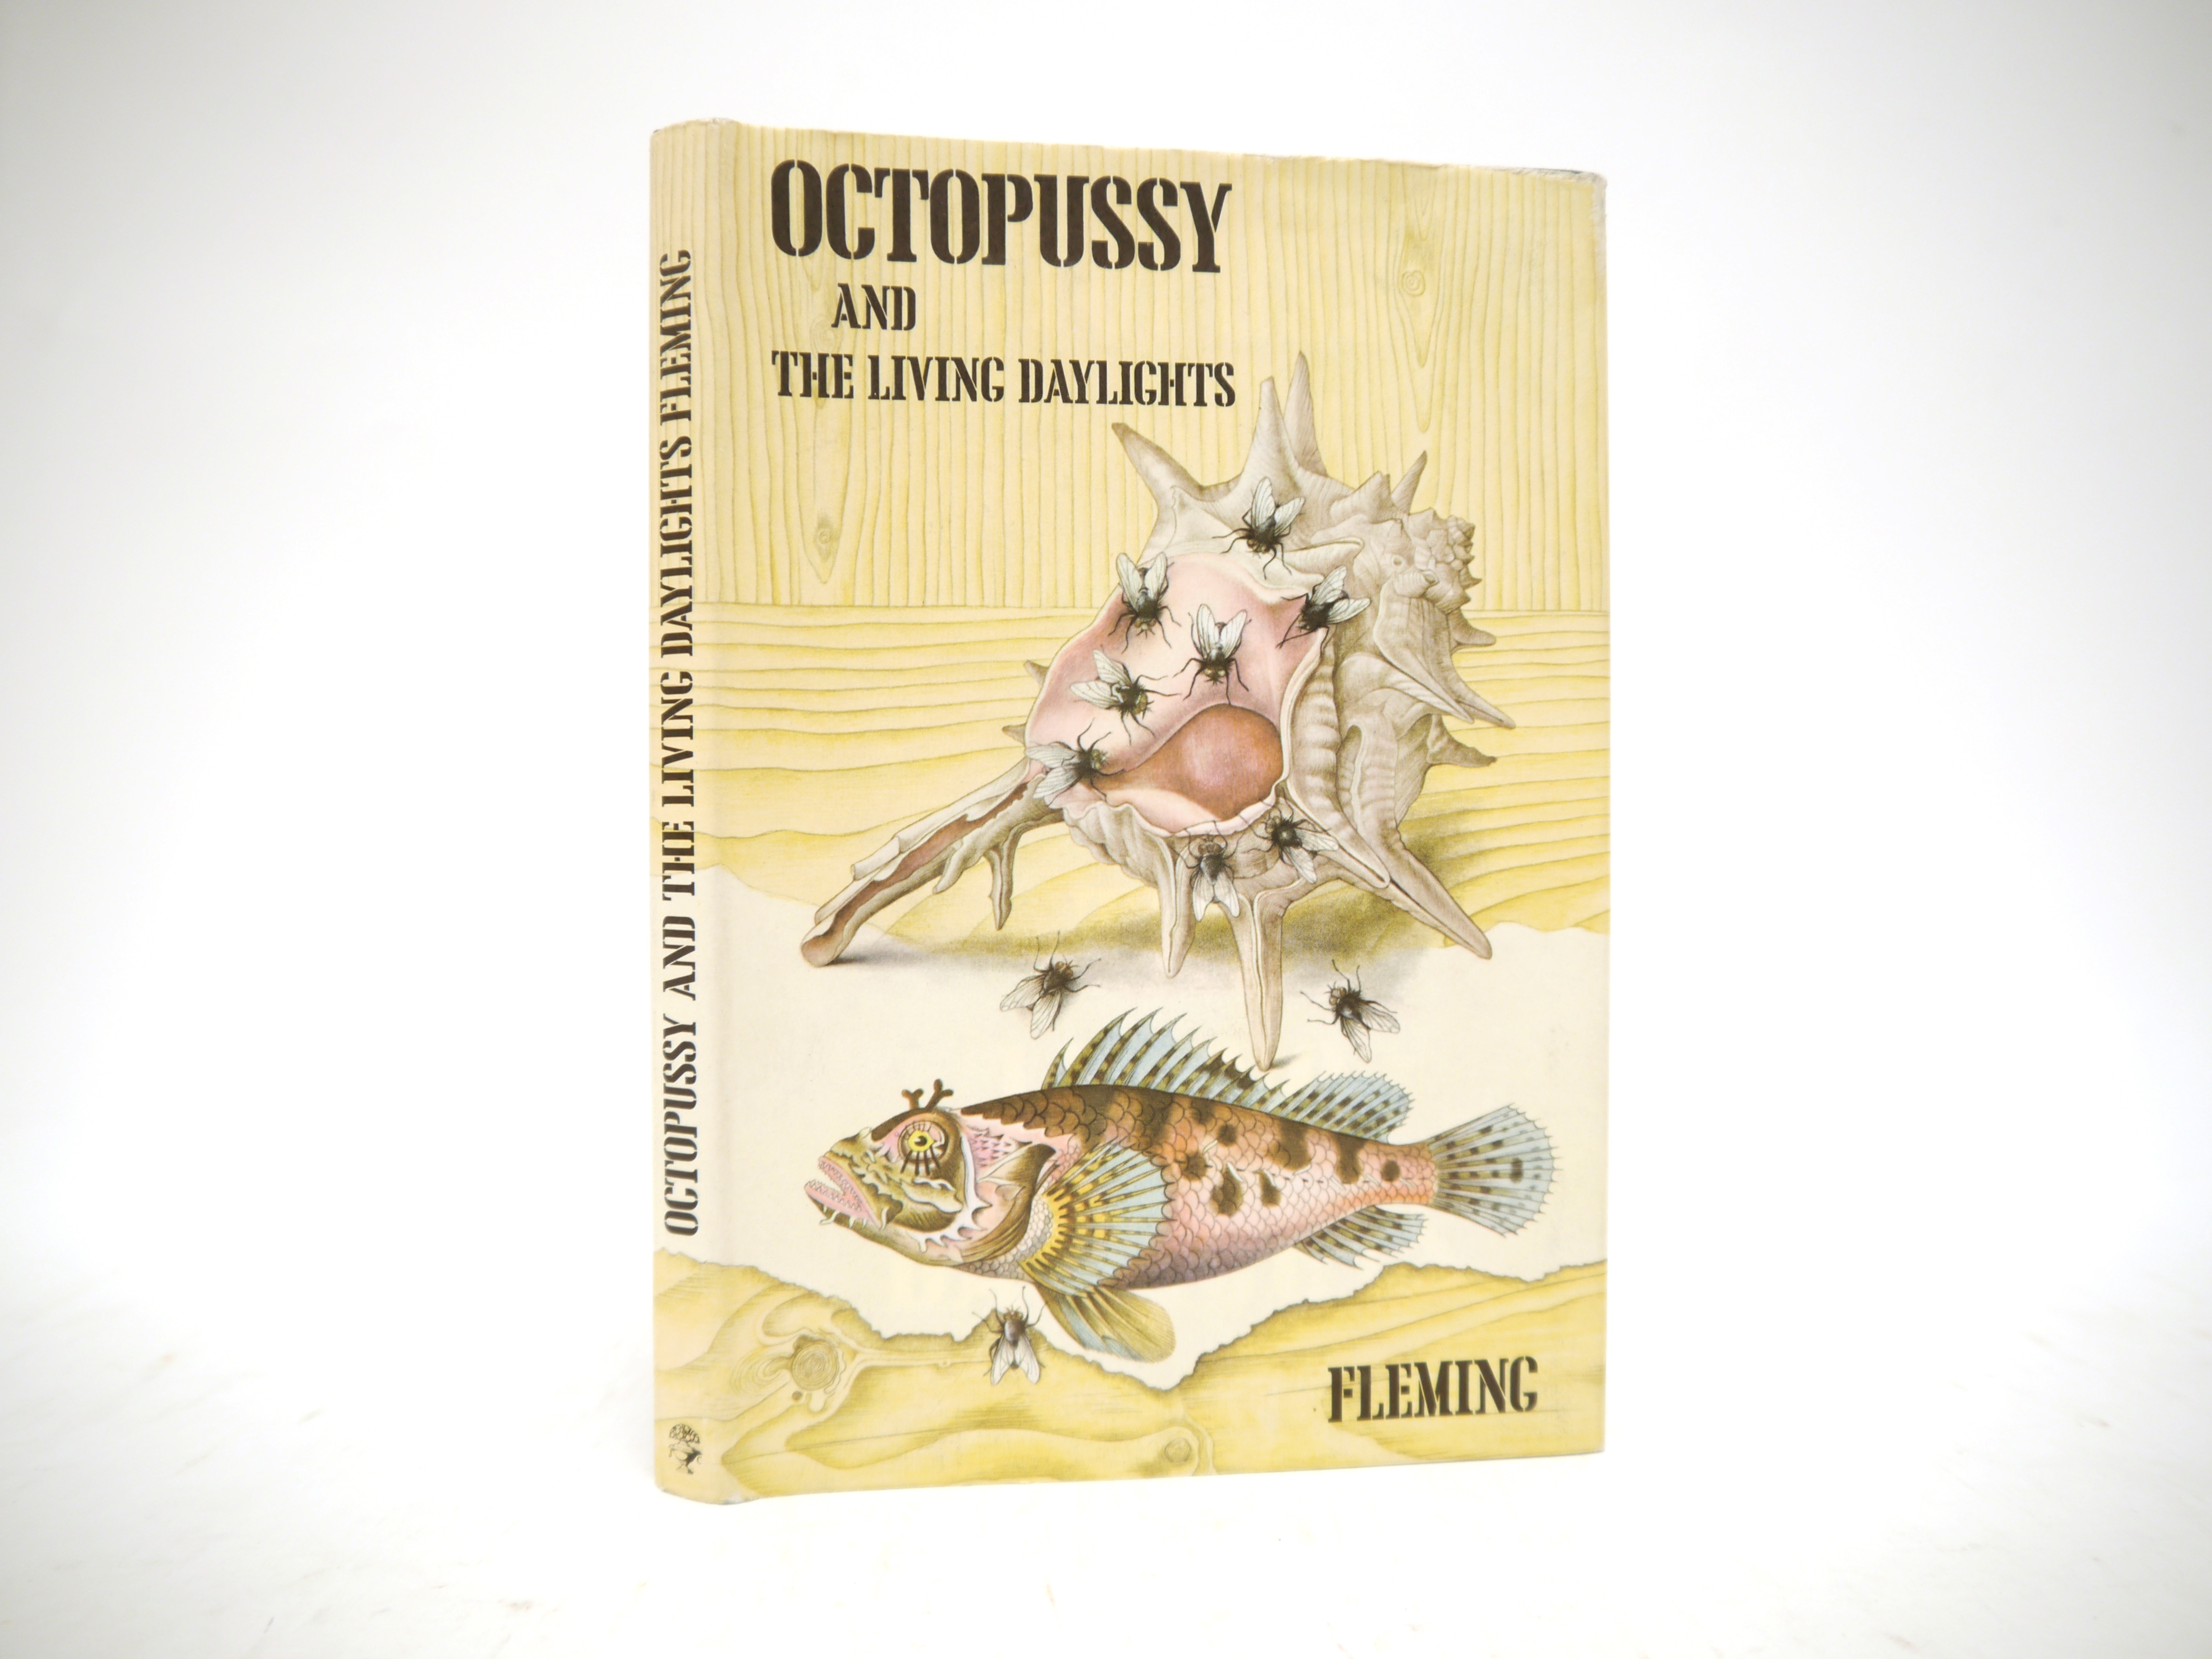 Ian Fleming: 'Octopussy and the Living Daylights', London, Jonathan Cape, 1966, 1st edition,